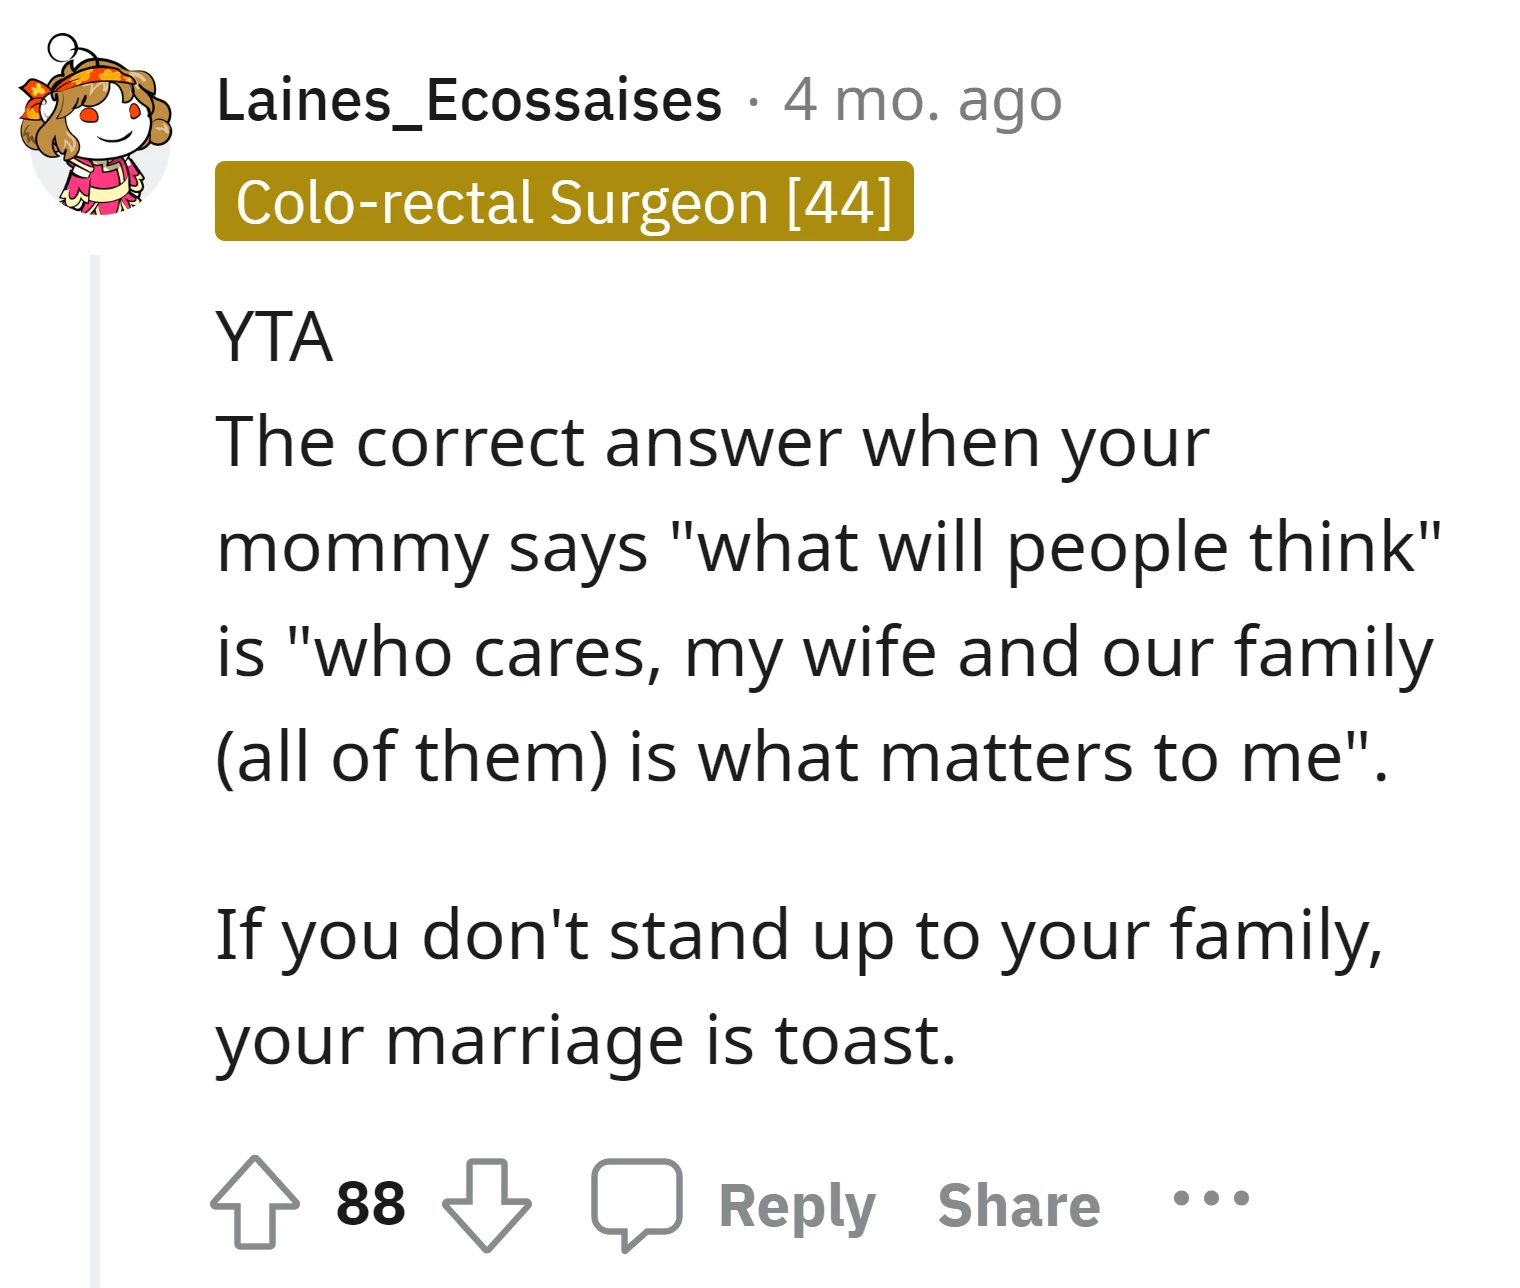 OP should prioritize his wife and entire family over concerns from his own family